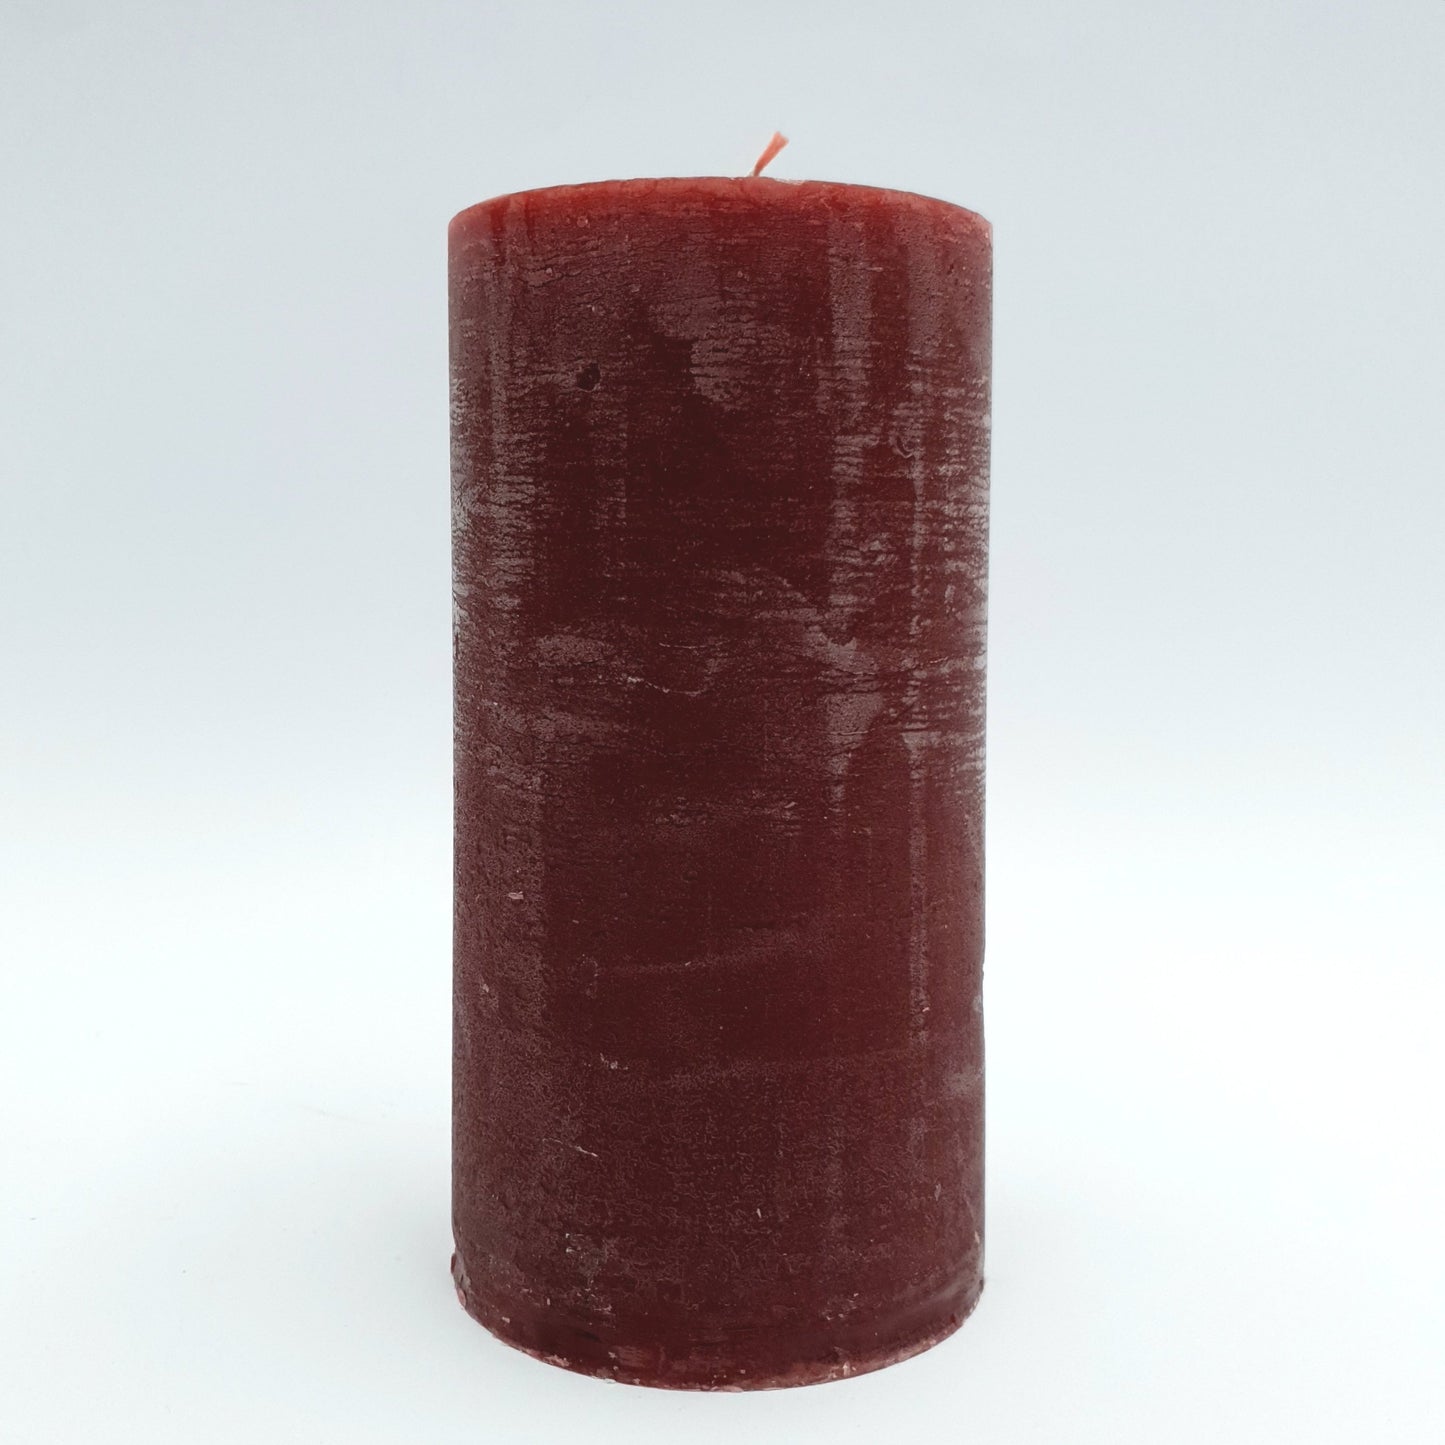 Candle cylinder ⌀ 10x20 cm with one wick, burgundy